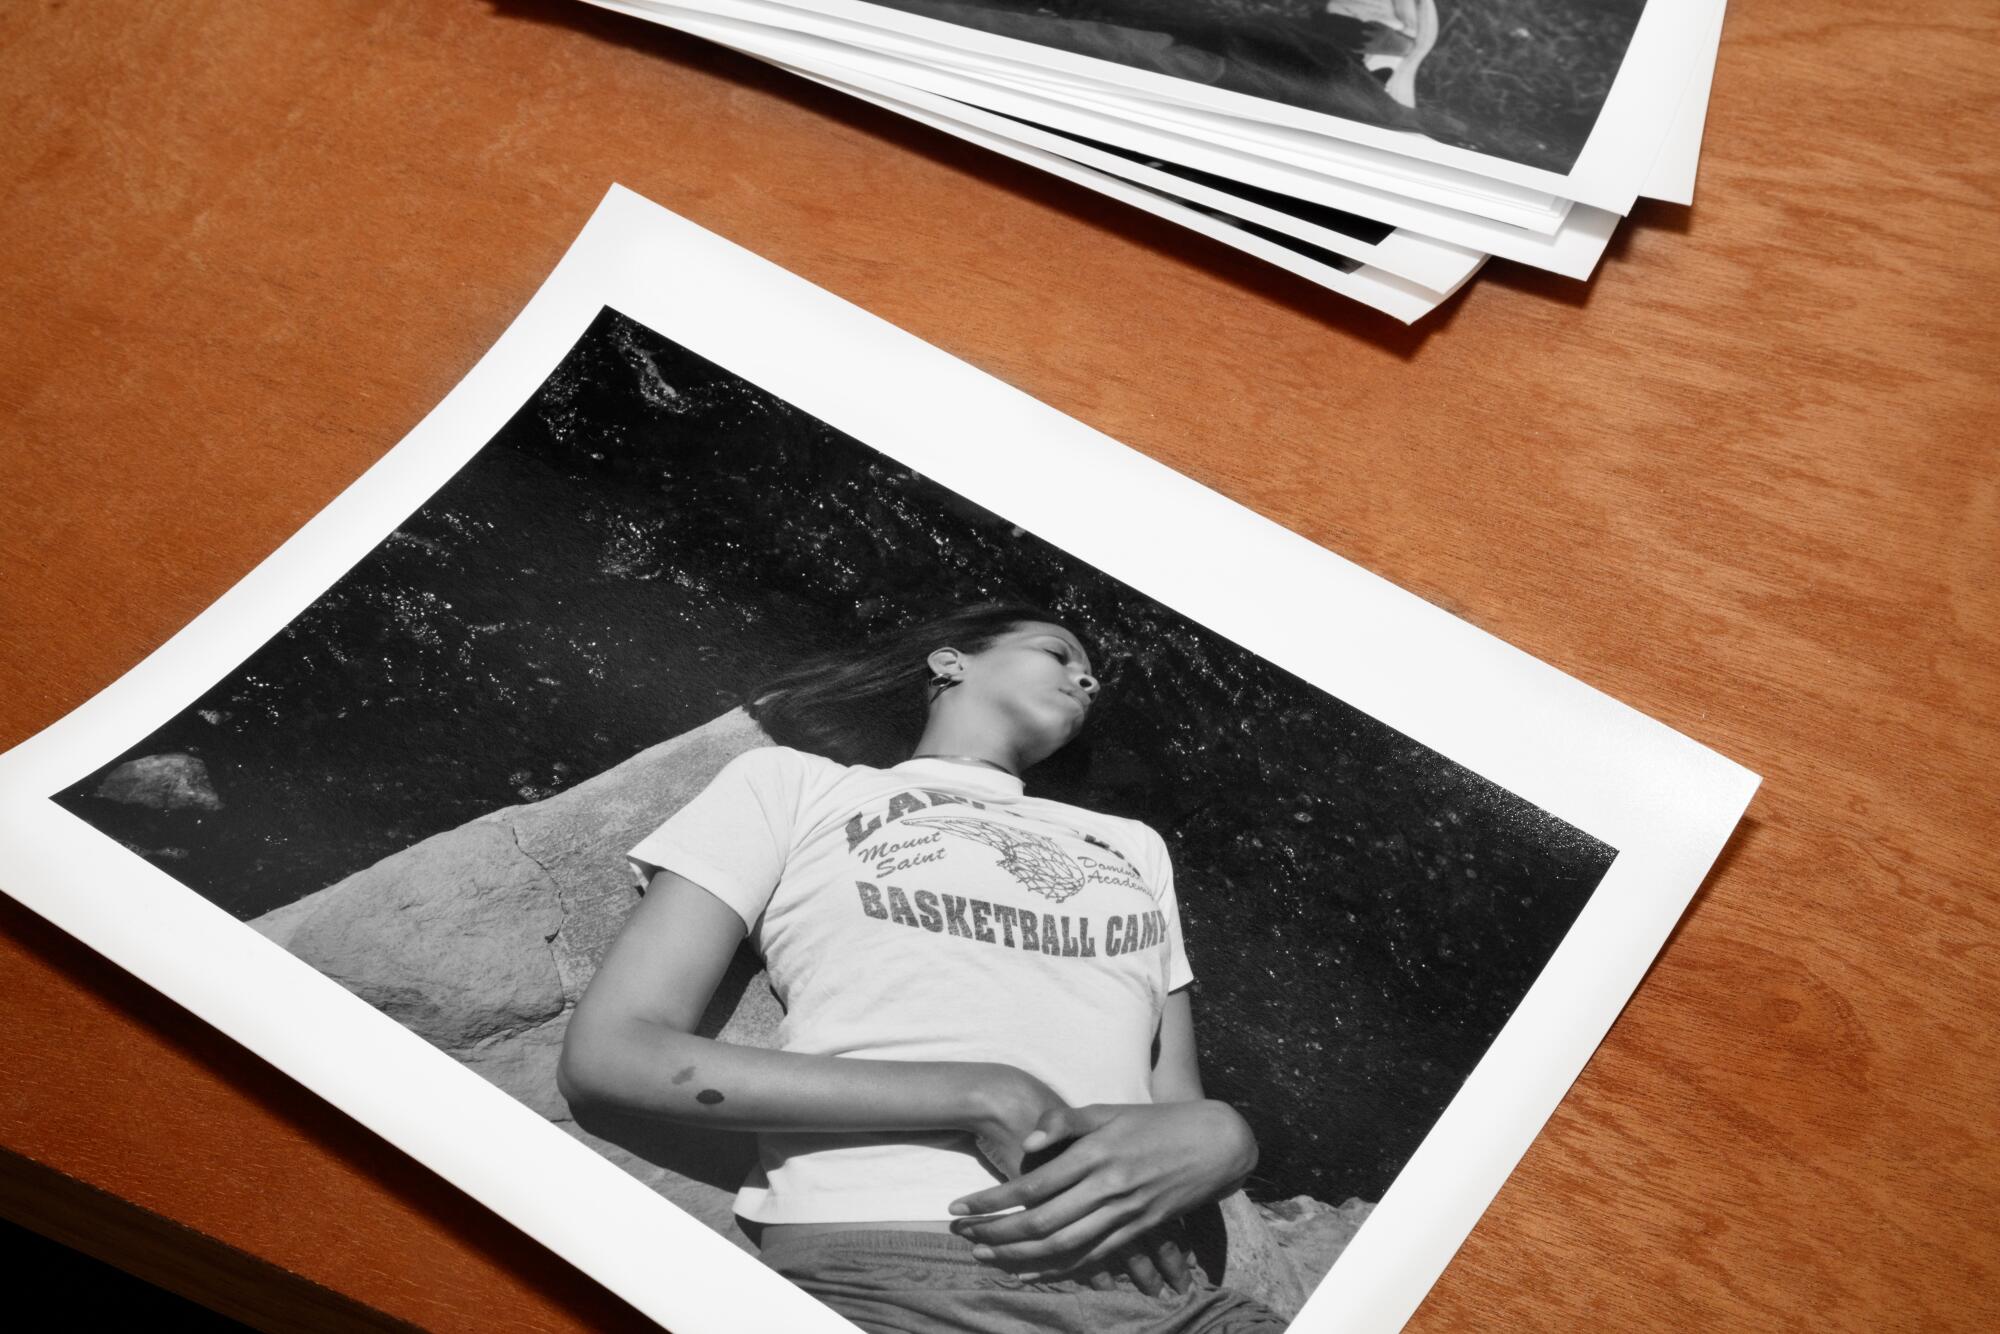 Image of a black and white photograph of Lacey in a basketball camp t-shirt lying on a rock surrounded by water.